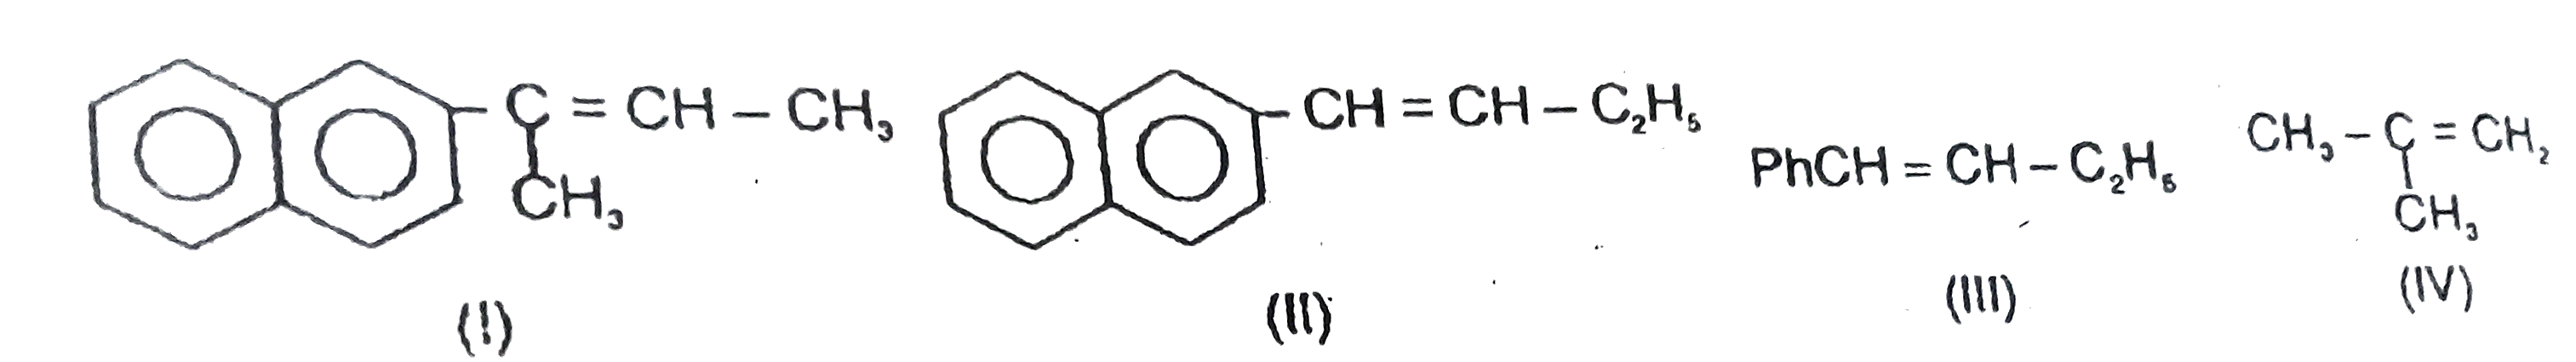 Which of the following correctly represents the rate of acid-catalysed hydration of following alkenes.      (III)PhCH=CH-C2H6 , (IV)CH3-undersetunderset(CH3)(|)C=CH2